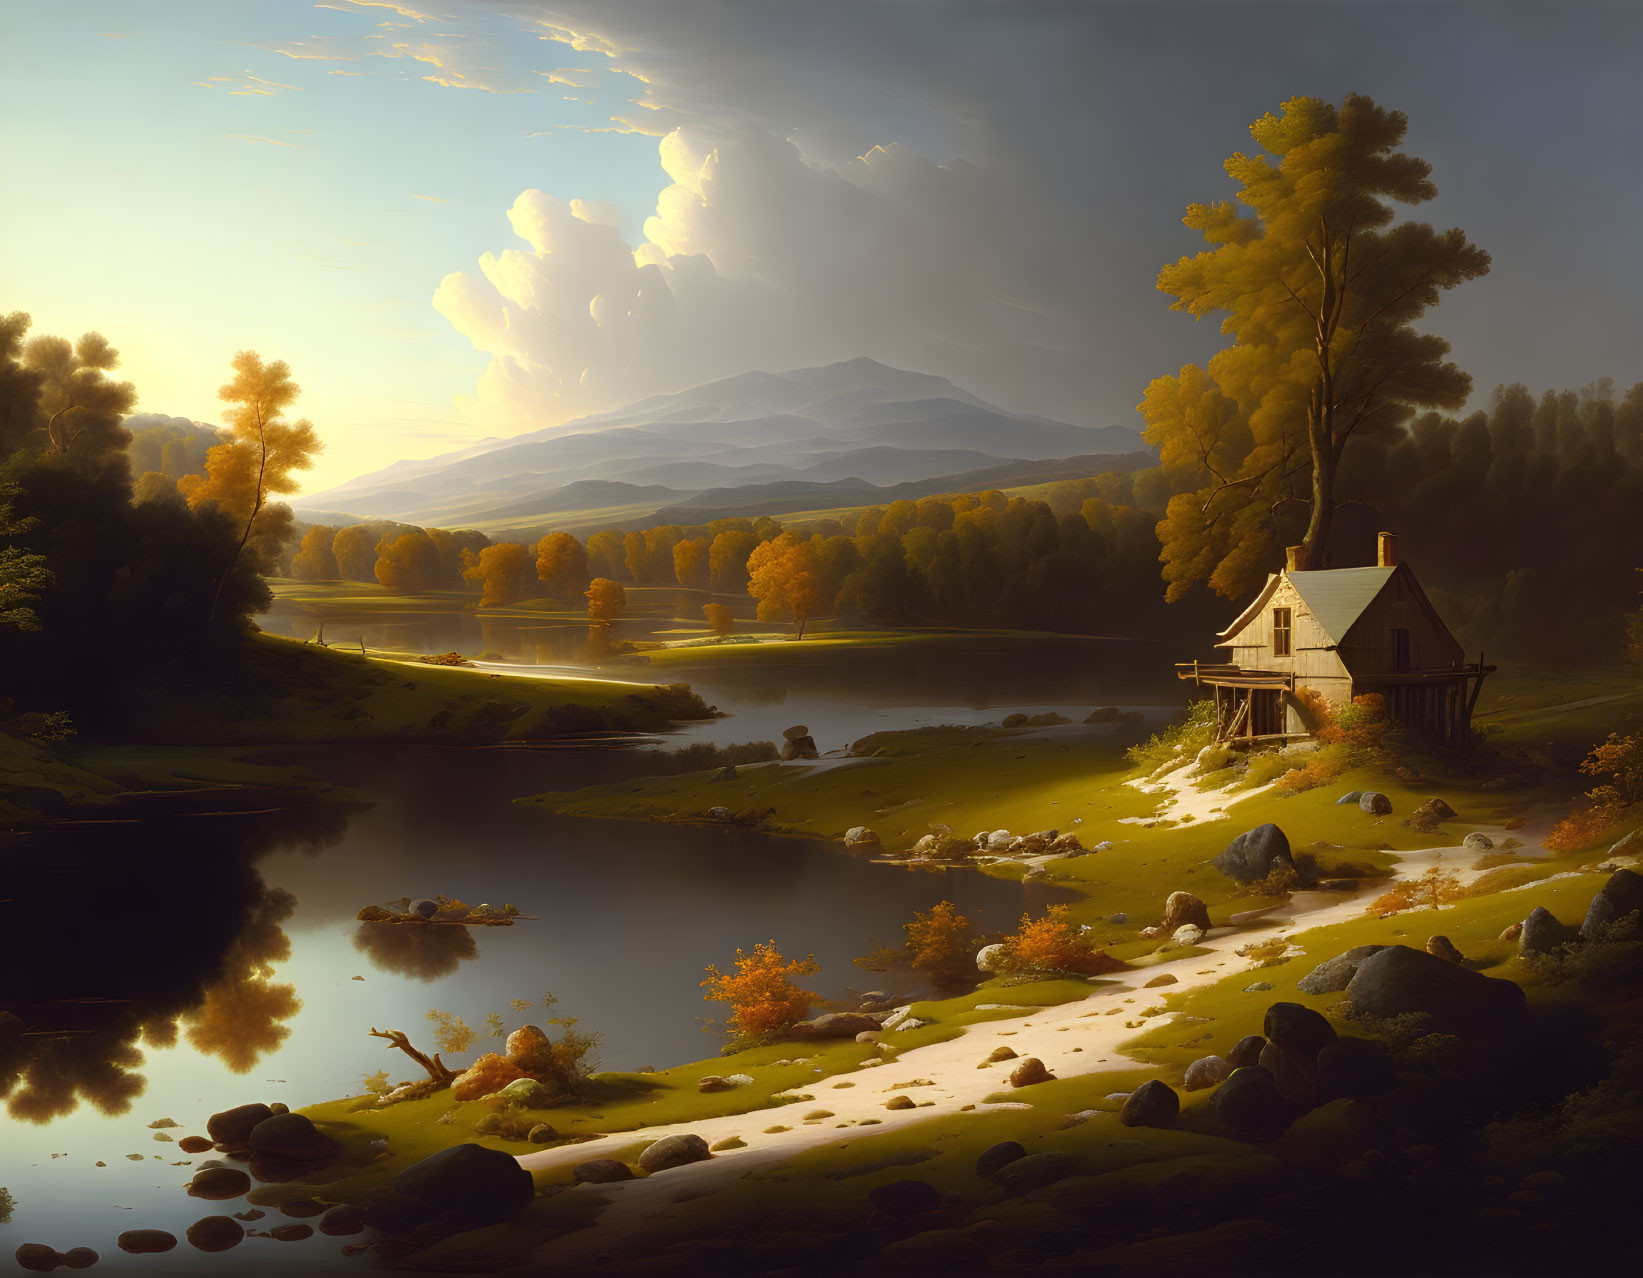 Tranquil landscape: cottage by serene lake, lush trees, dramatic sky